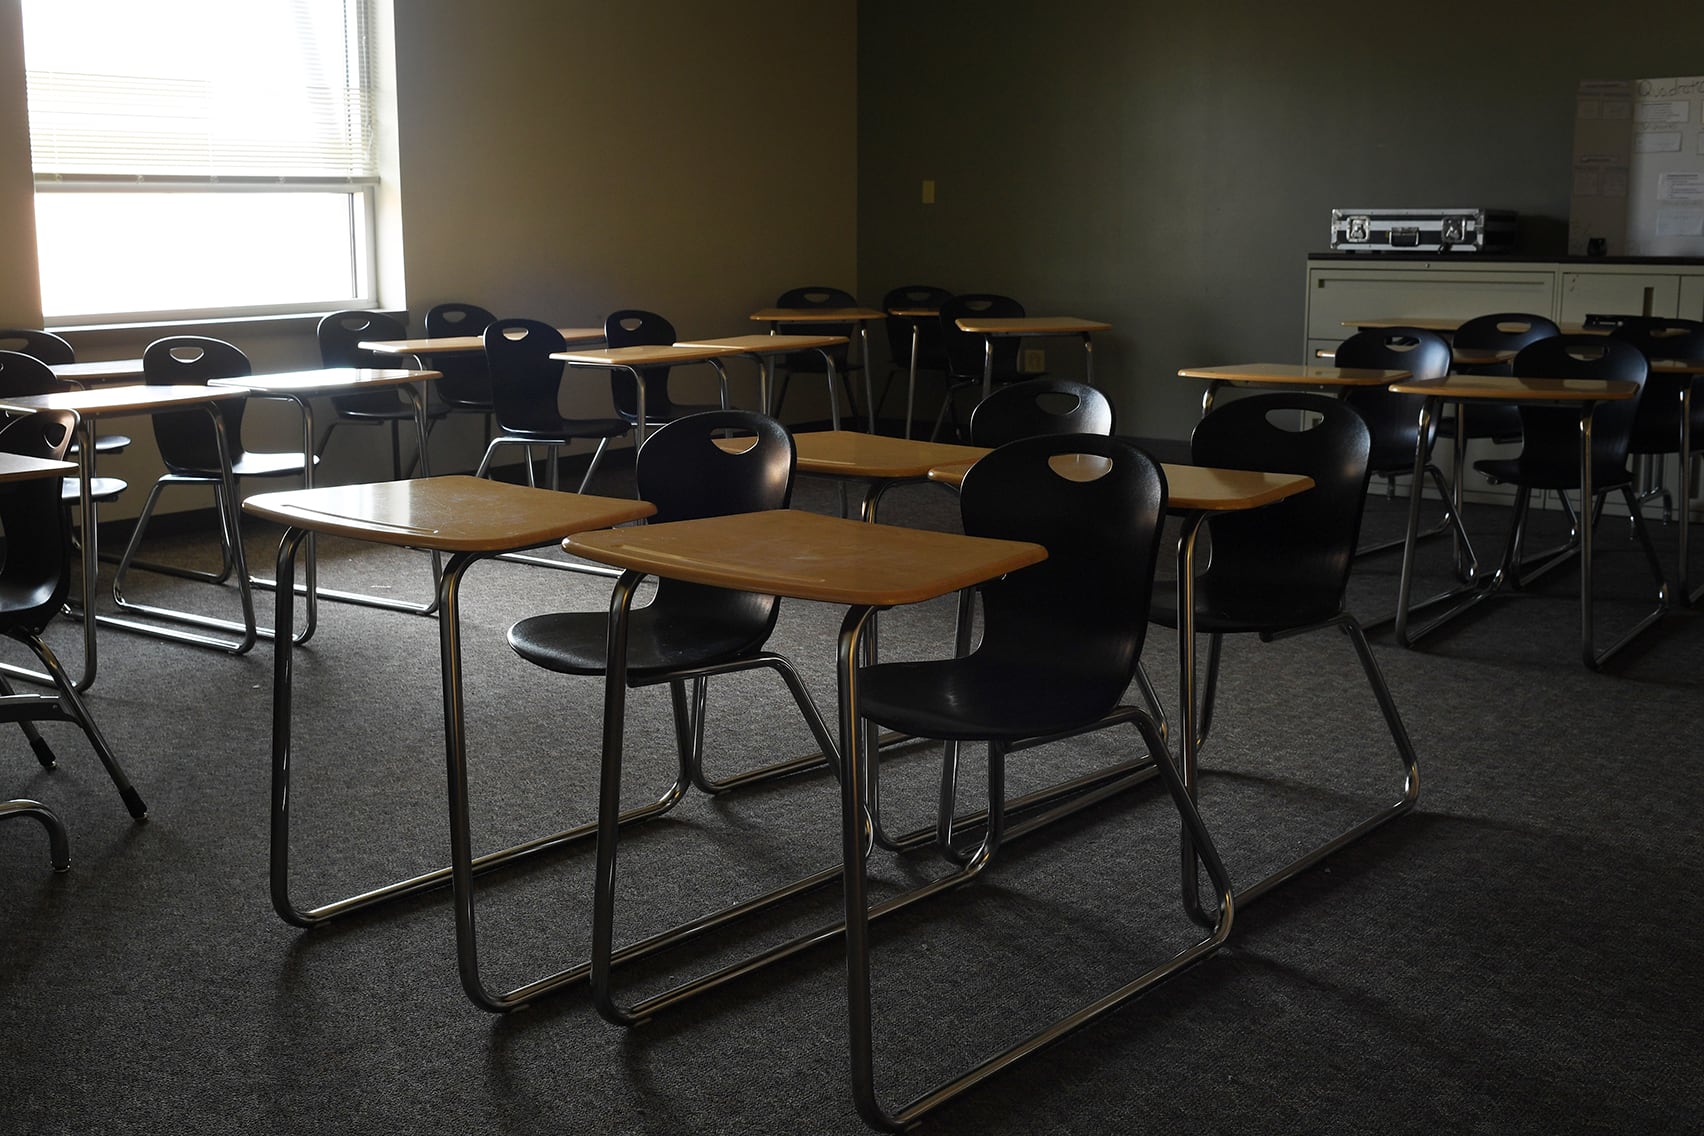 An empty classroom full of school desks with a large window in the background.